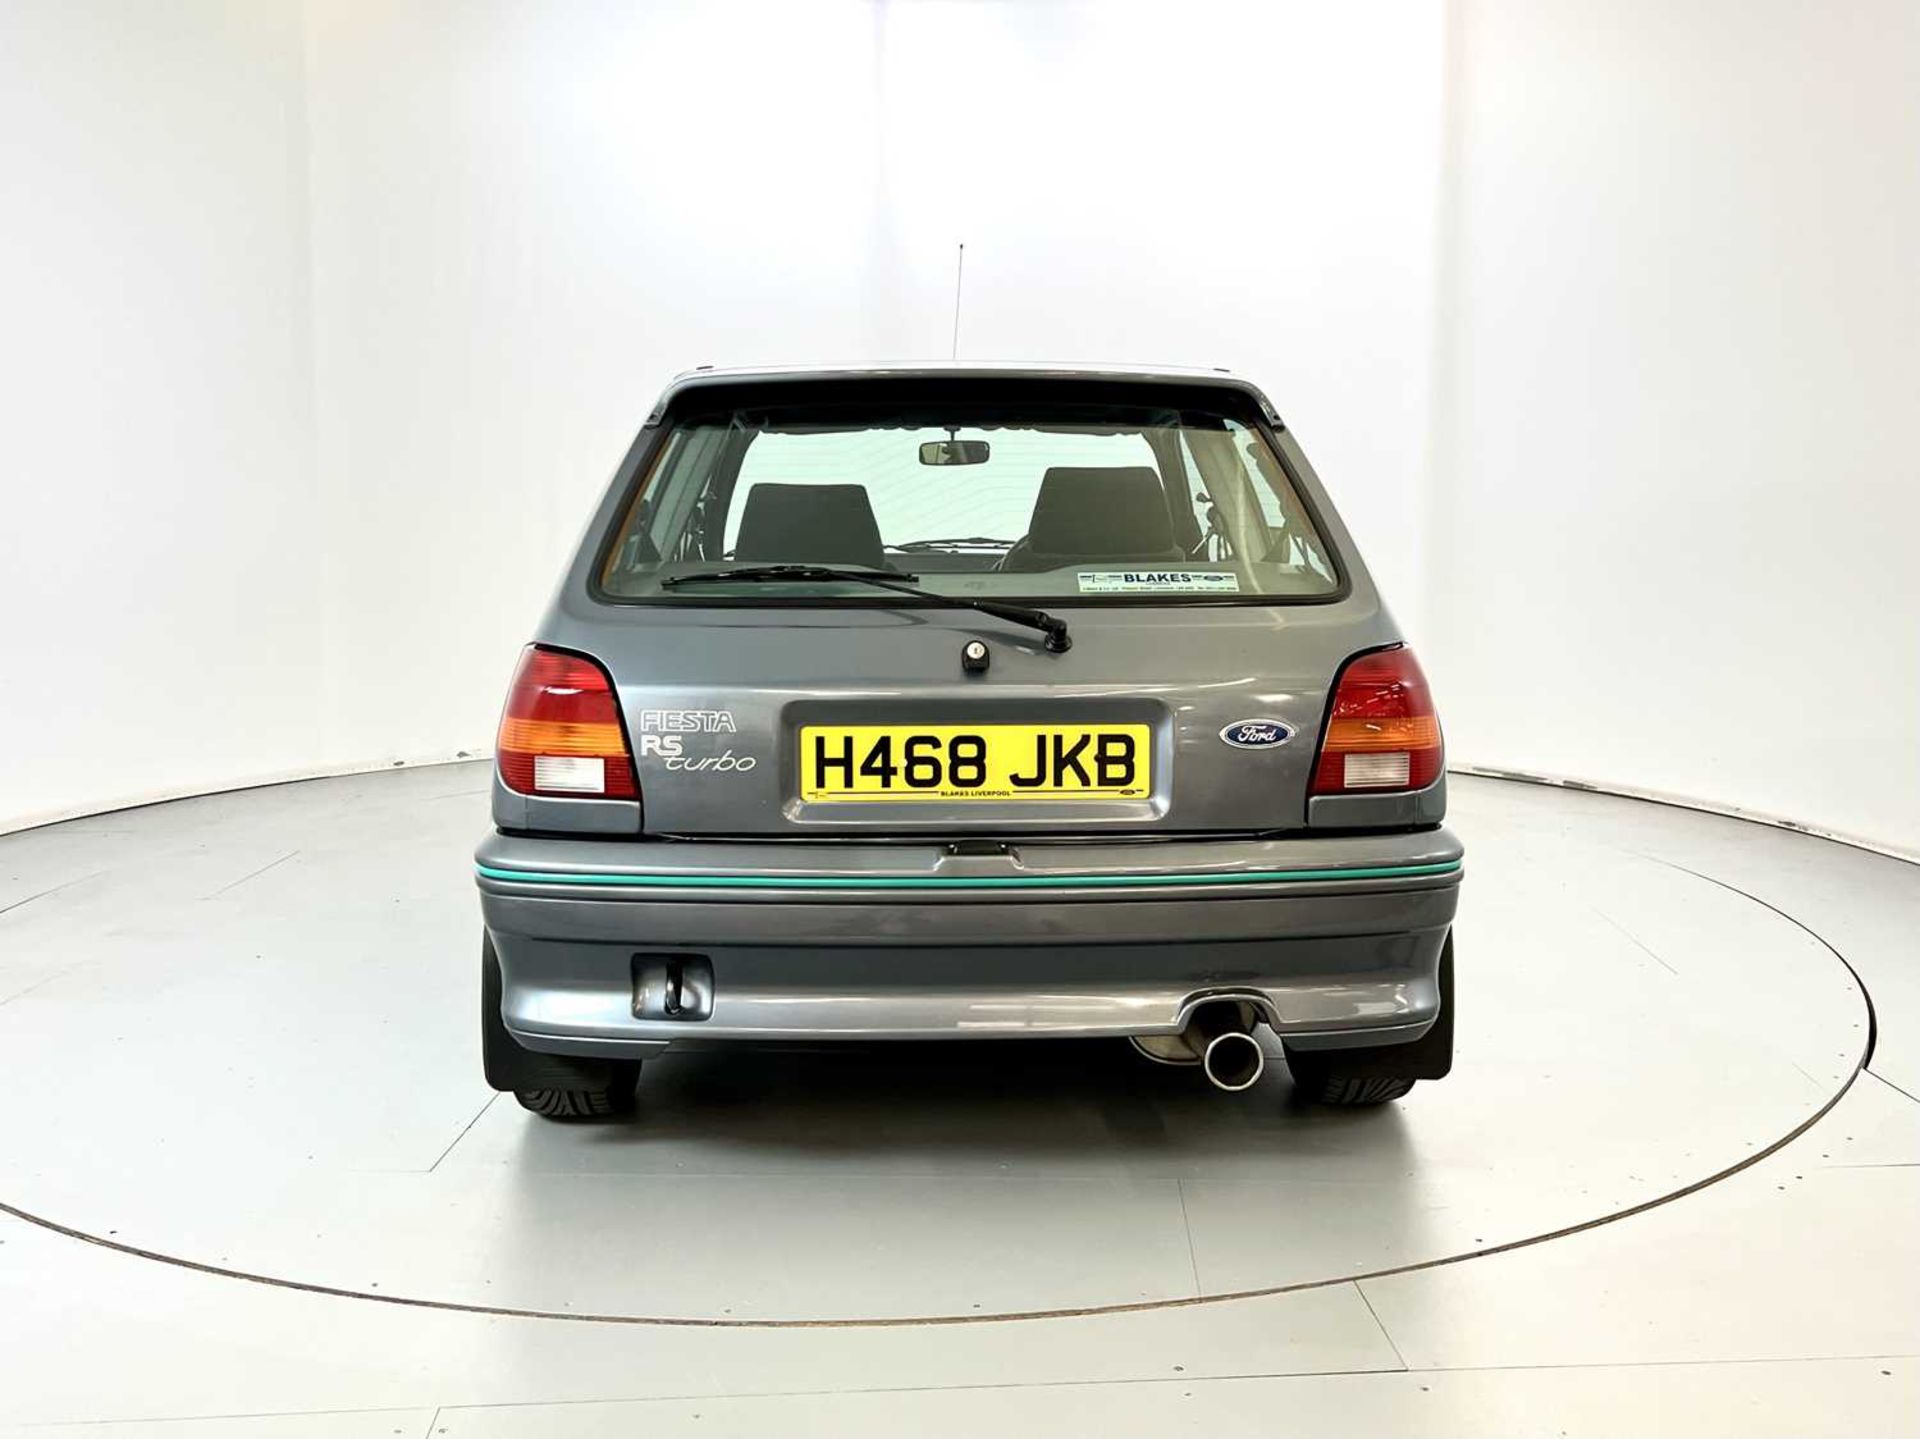 1991 Ford Fiesta RS Turbo - Image 8 of 32